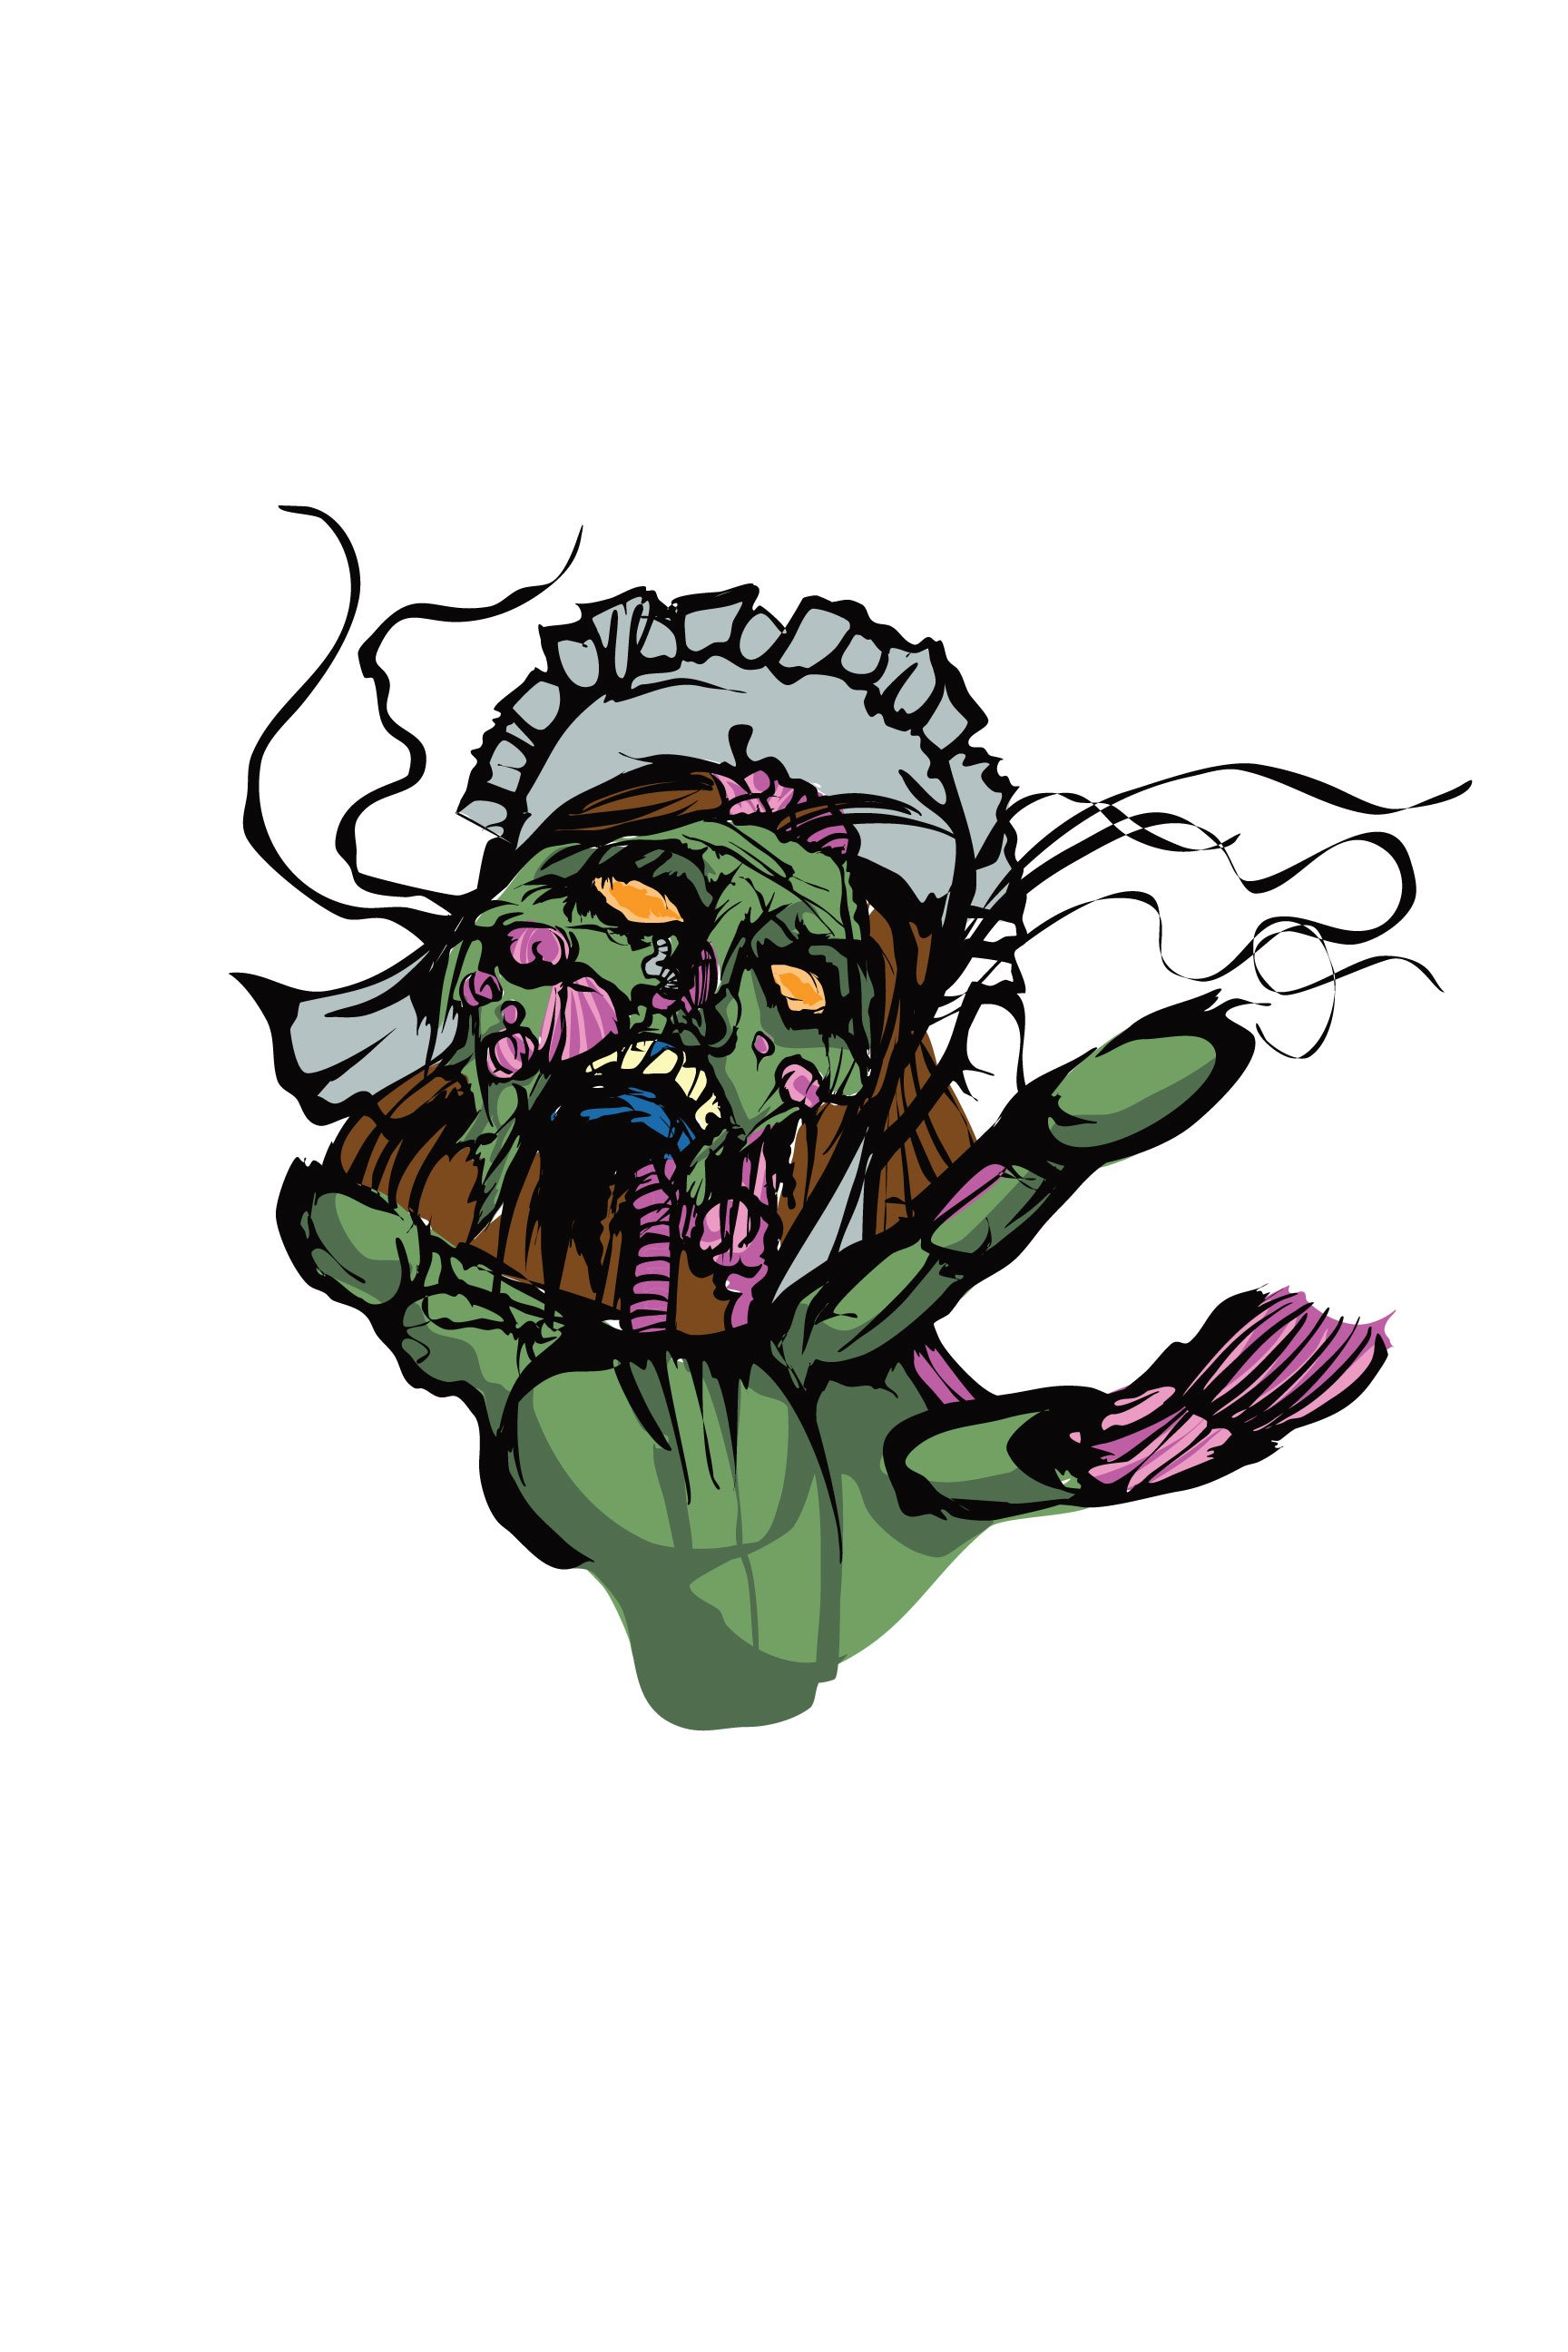 RR_Zombie_Woman_Outline_And_Color_Layers_CompA_v001_LAYERED.jpg